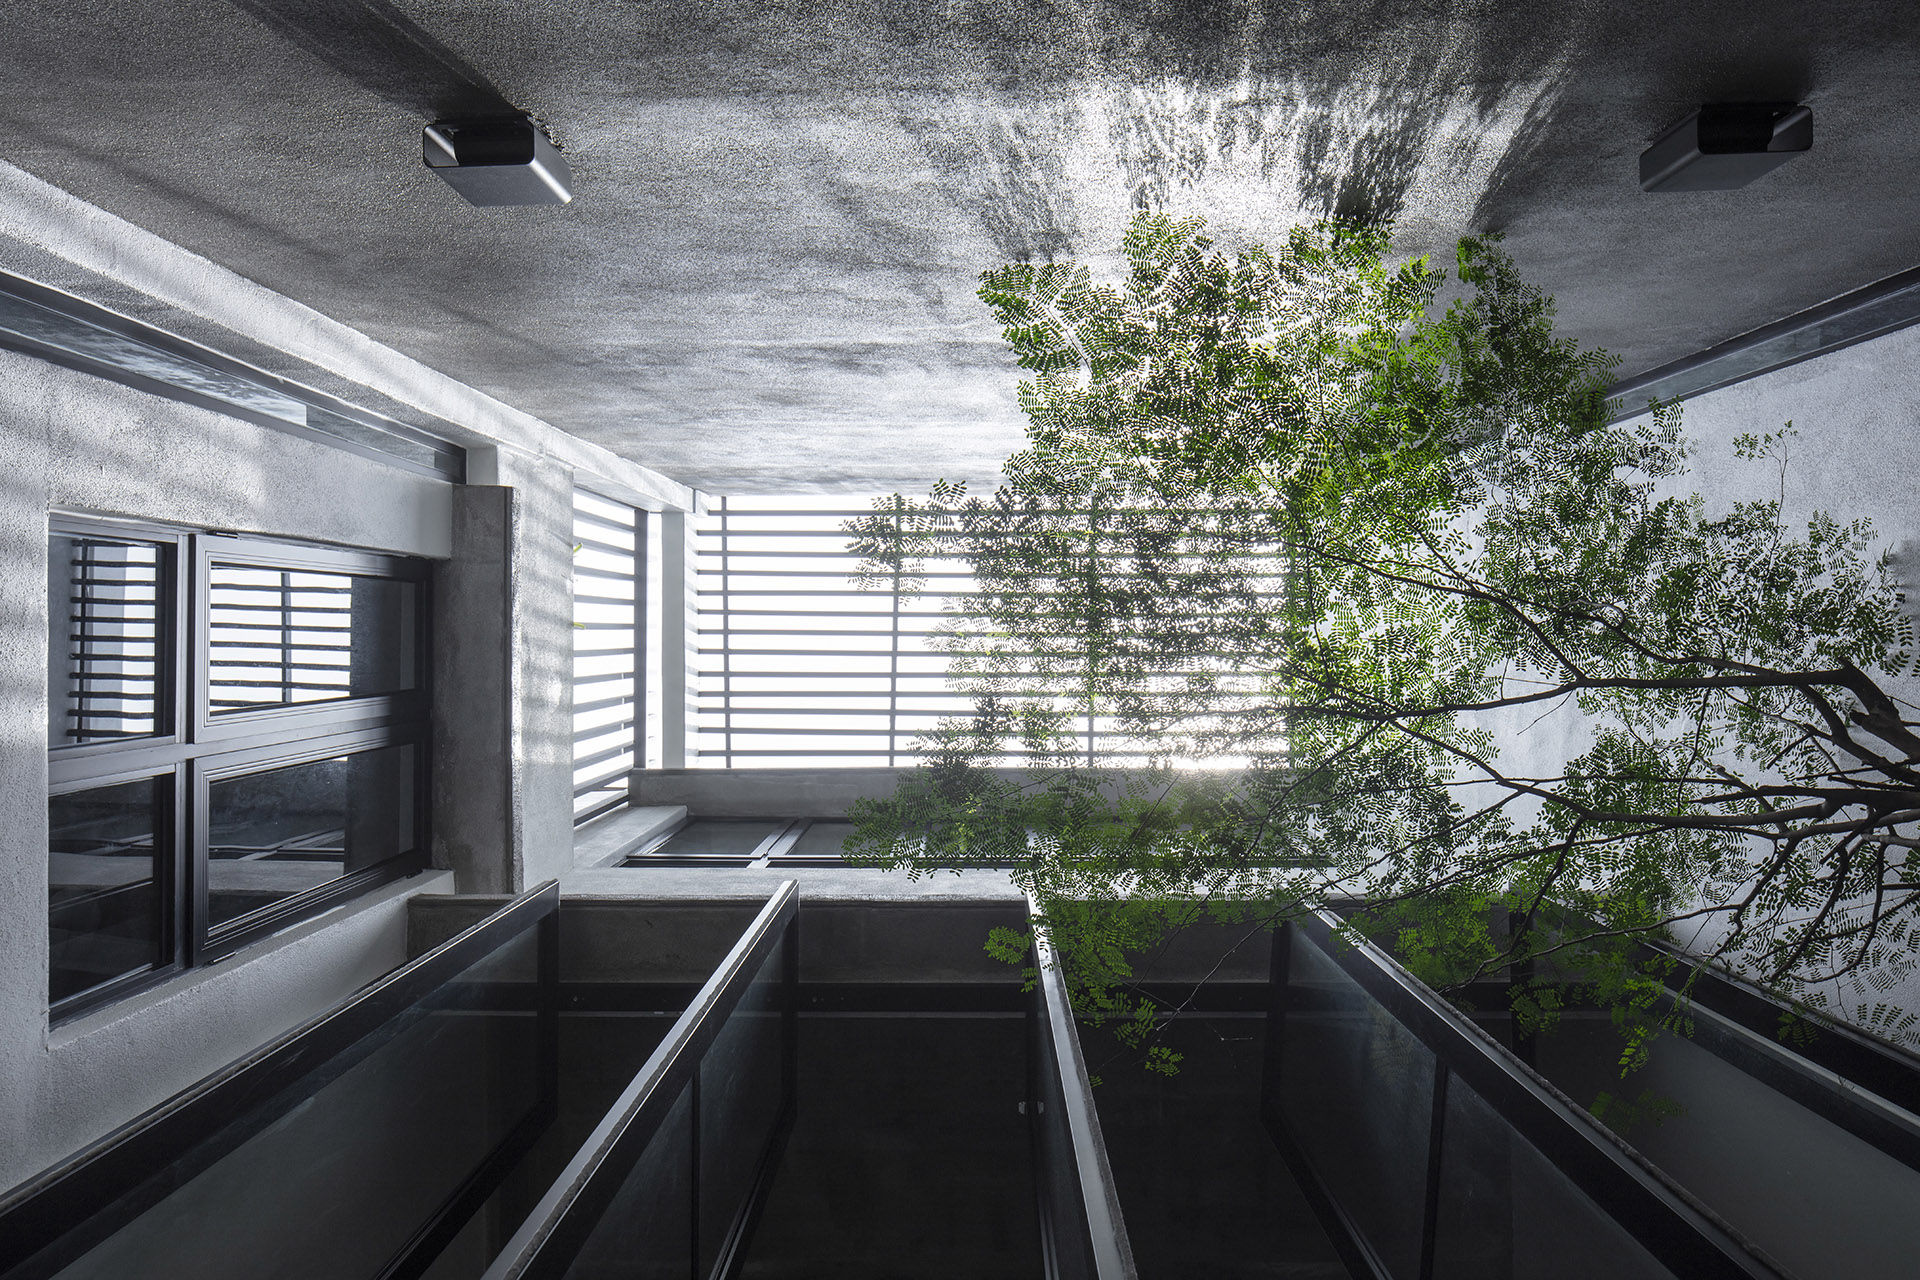 Outdoor that breaks into indoor. Light, sky, air and vegetation animate an industrial-chic house